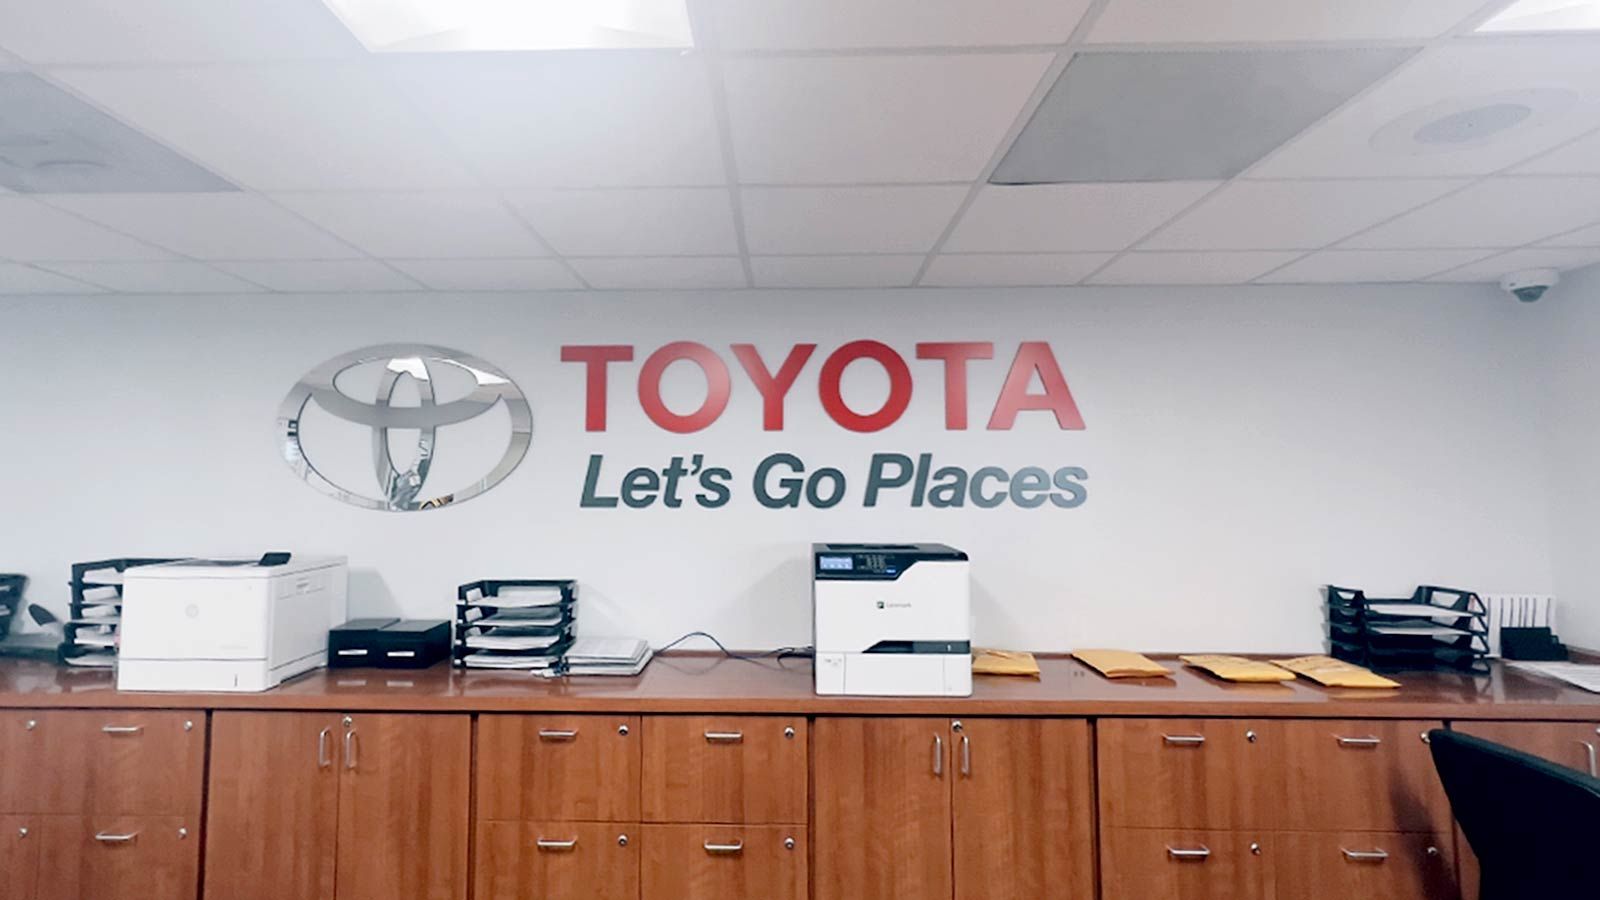 Toyota office sign decorating the interior wall